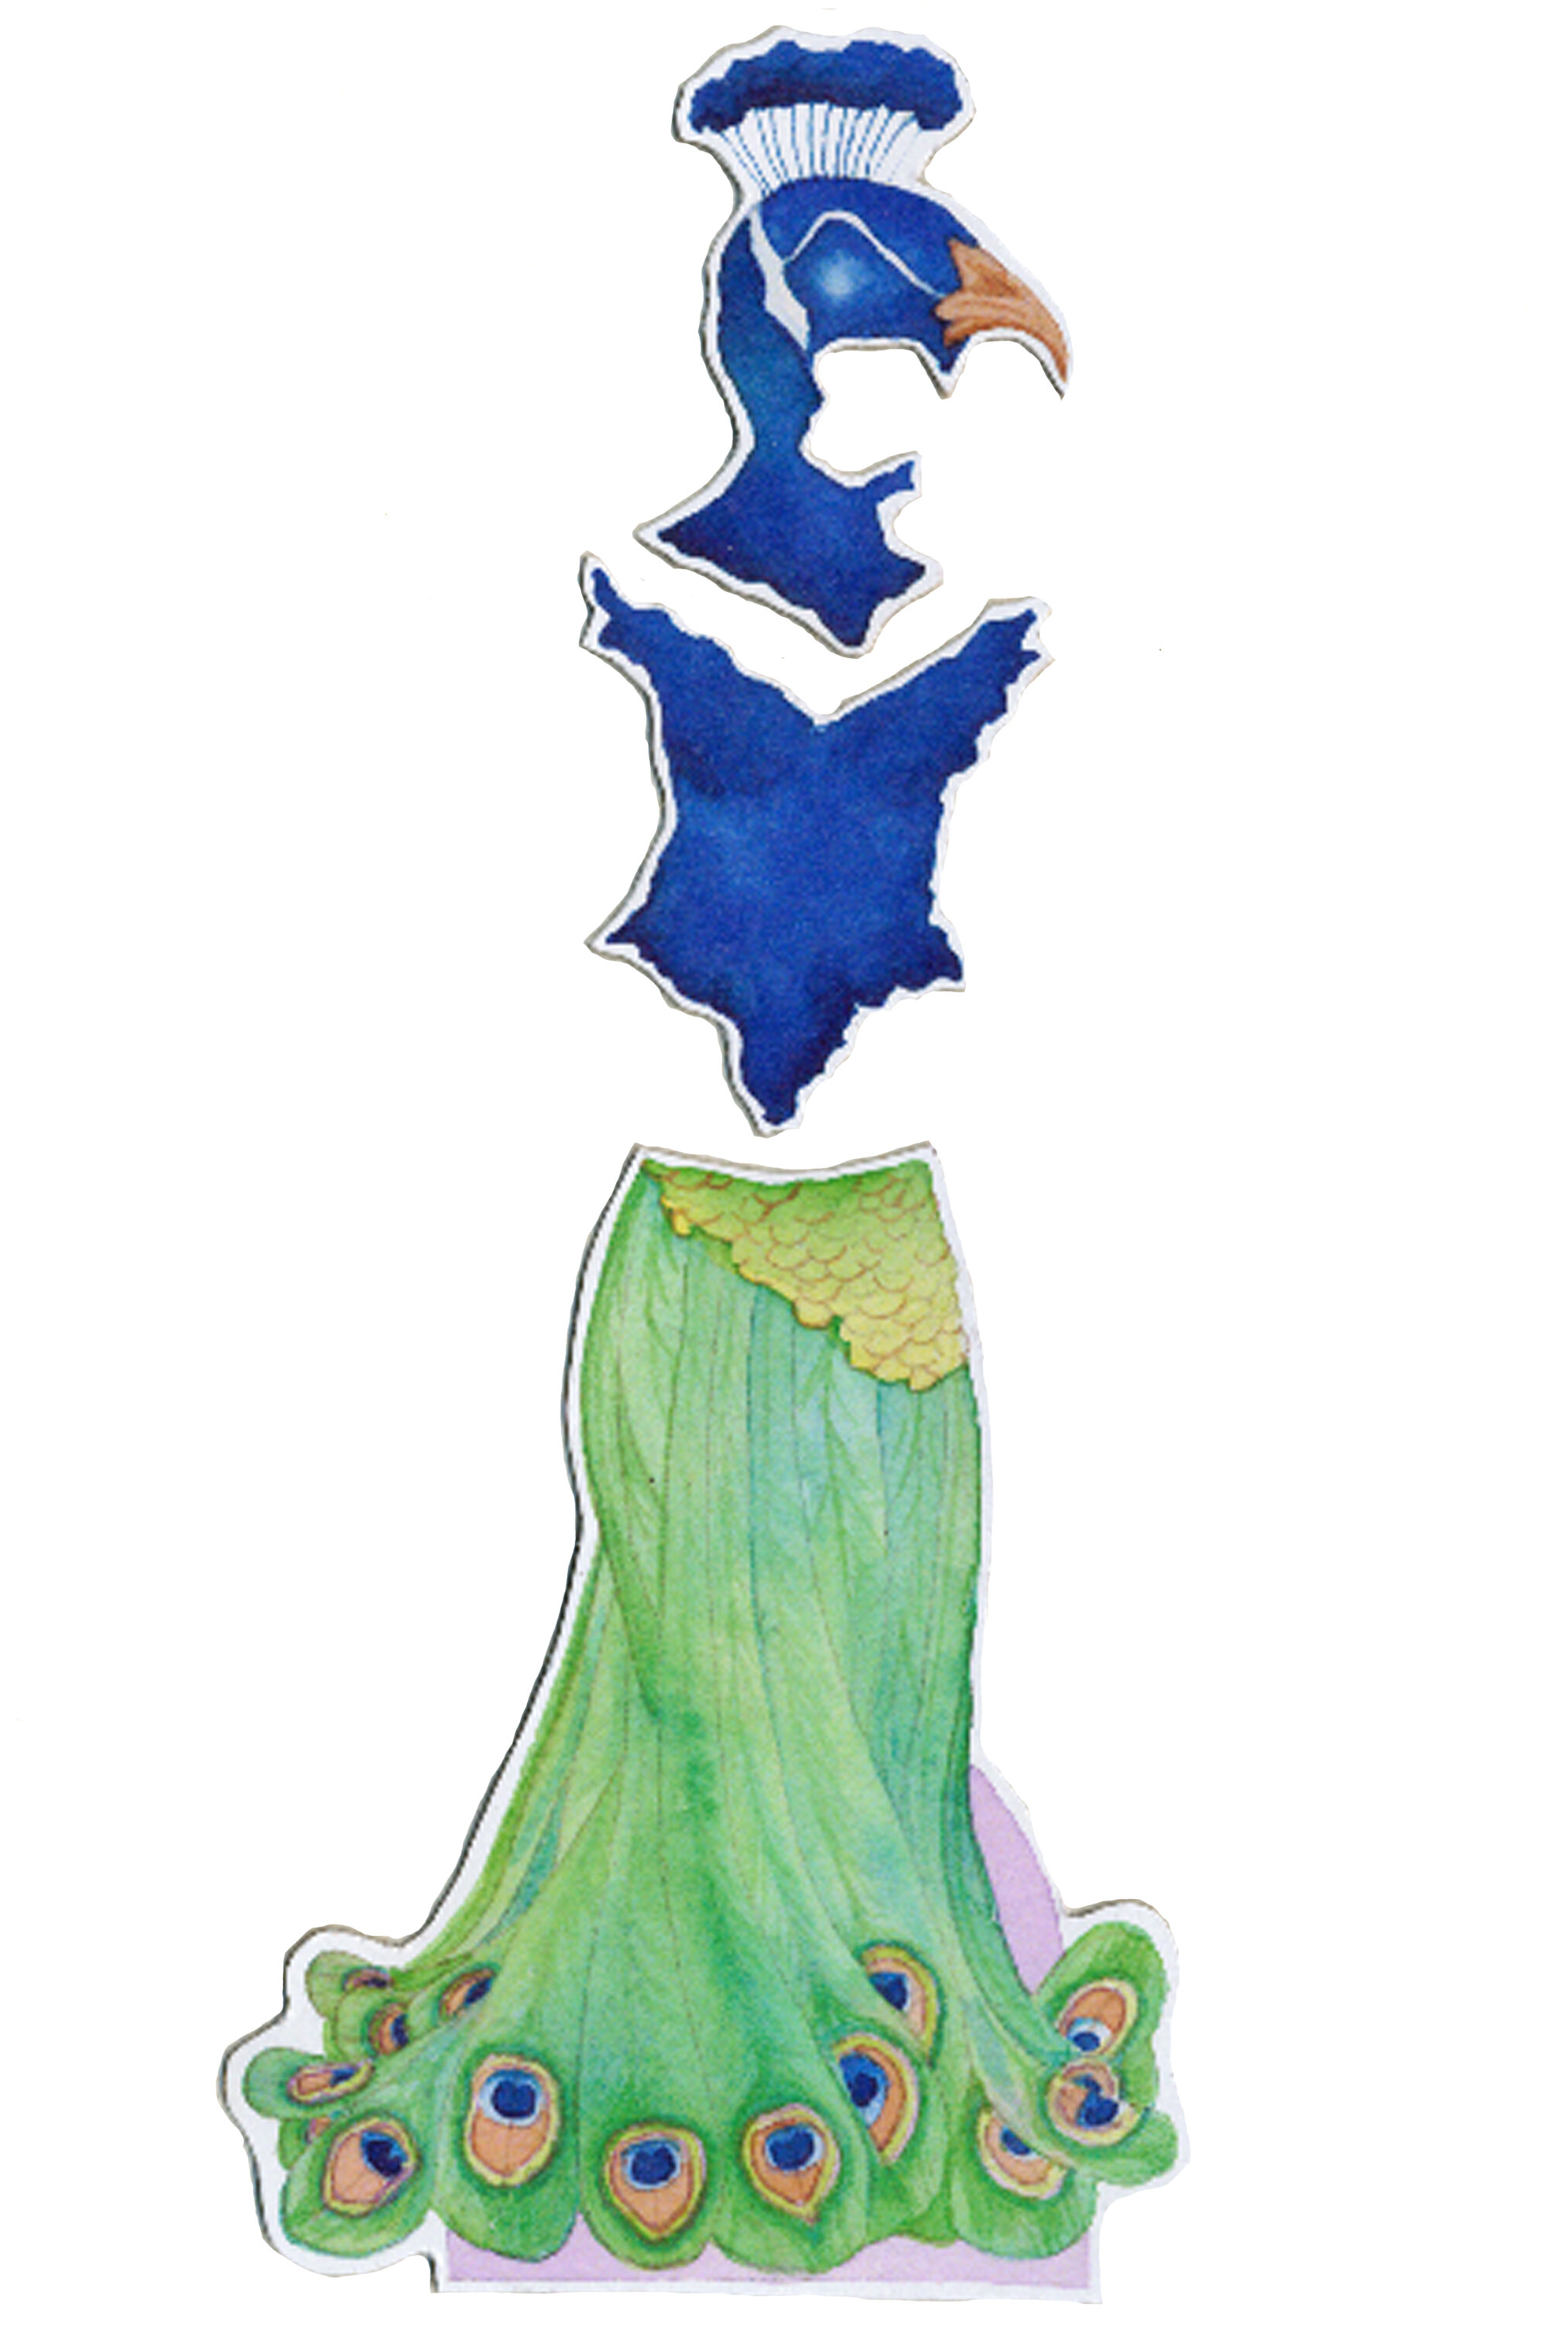 peacock_cutout_pieces_photo_white_background.jpg